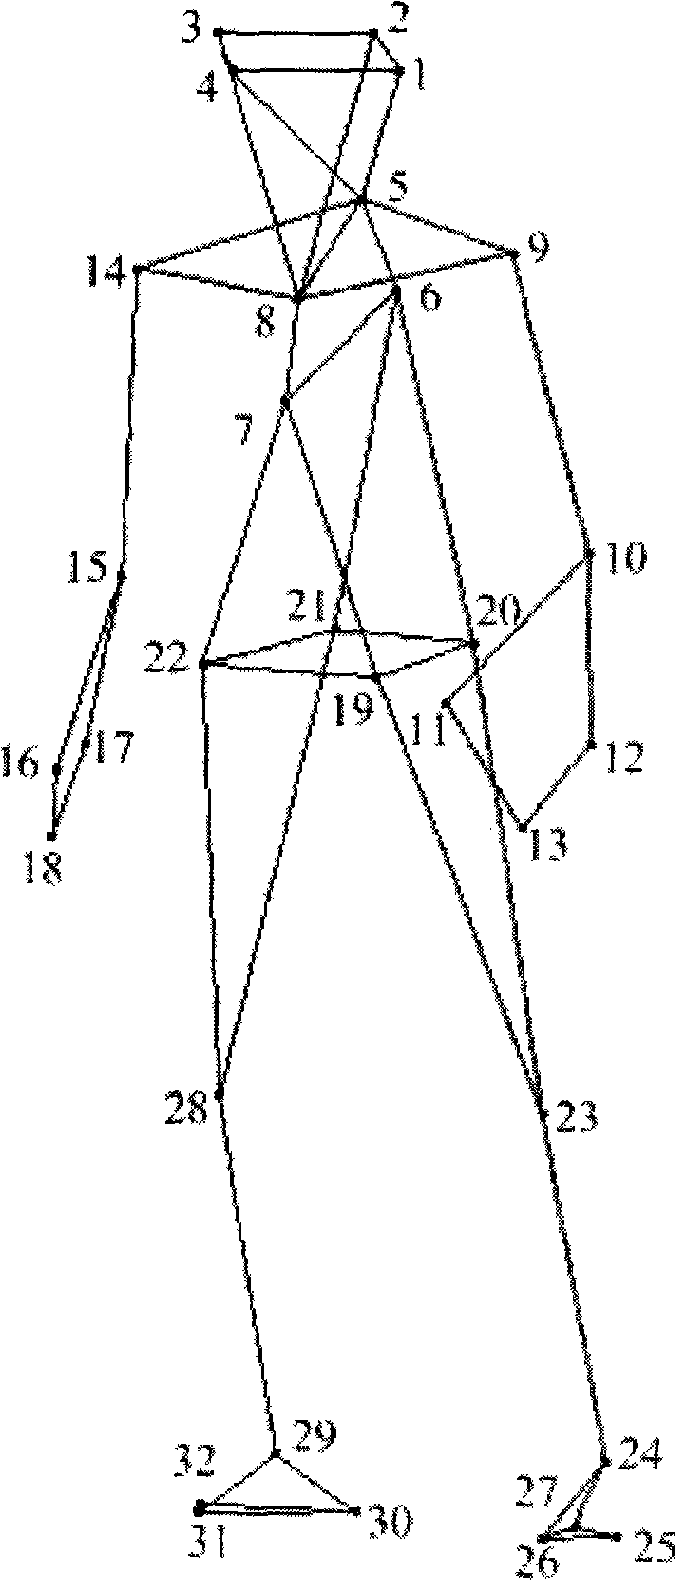 Optical motion capture data processing method based on dynamic template